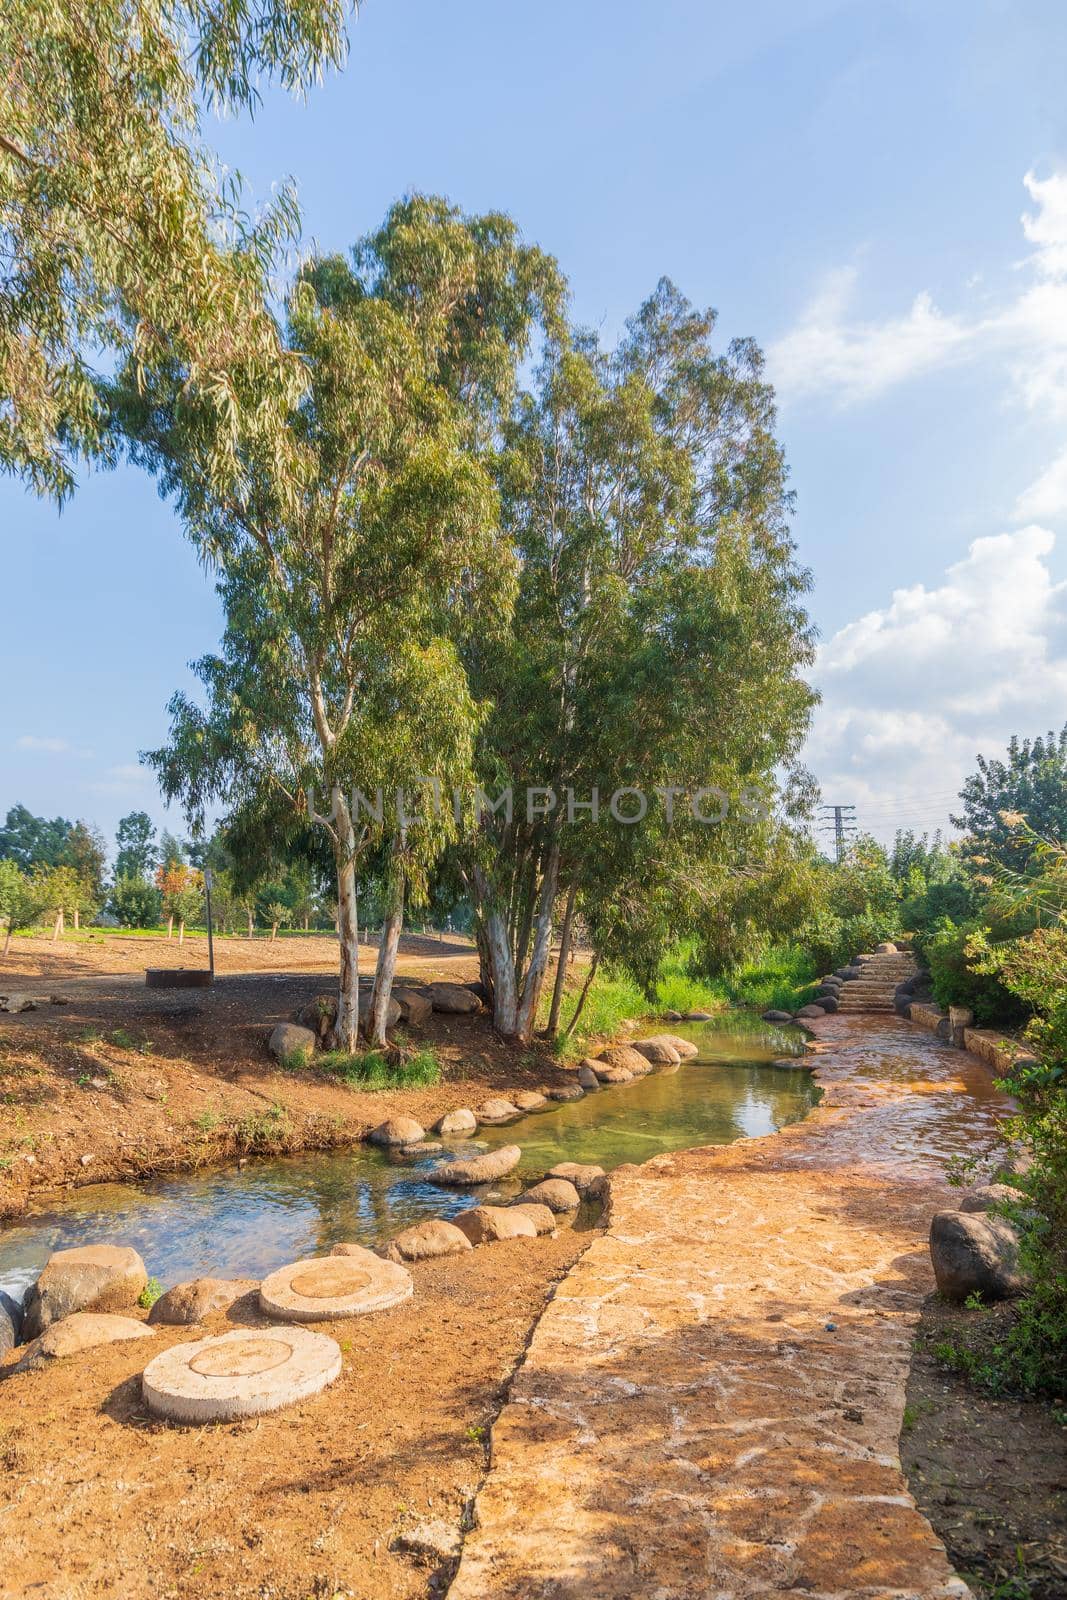 View of Horshaat Gideon (Gideon Grove), with a water pool with Eucalyptus trees, along the Harod stream, Jezreel valley, Northern Israel